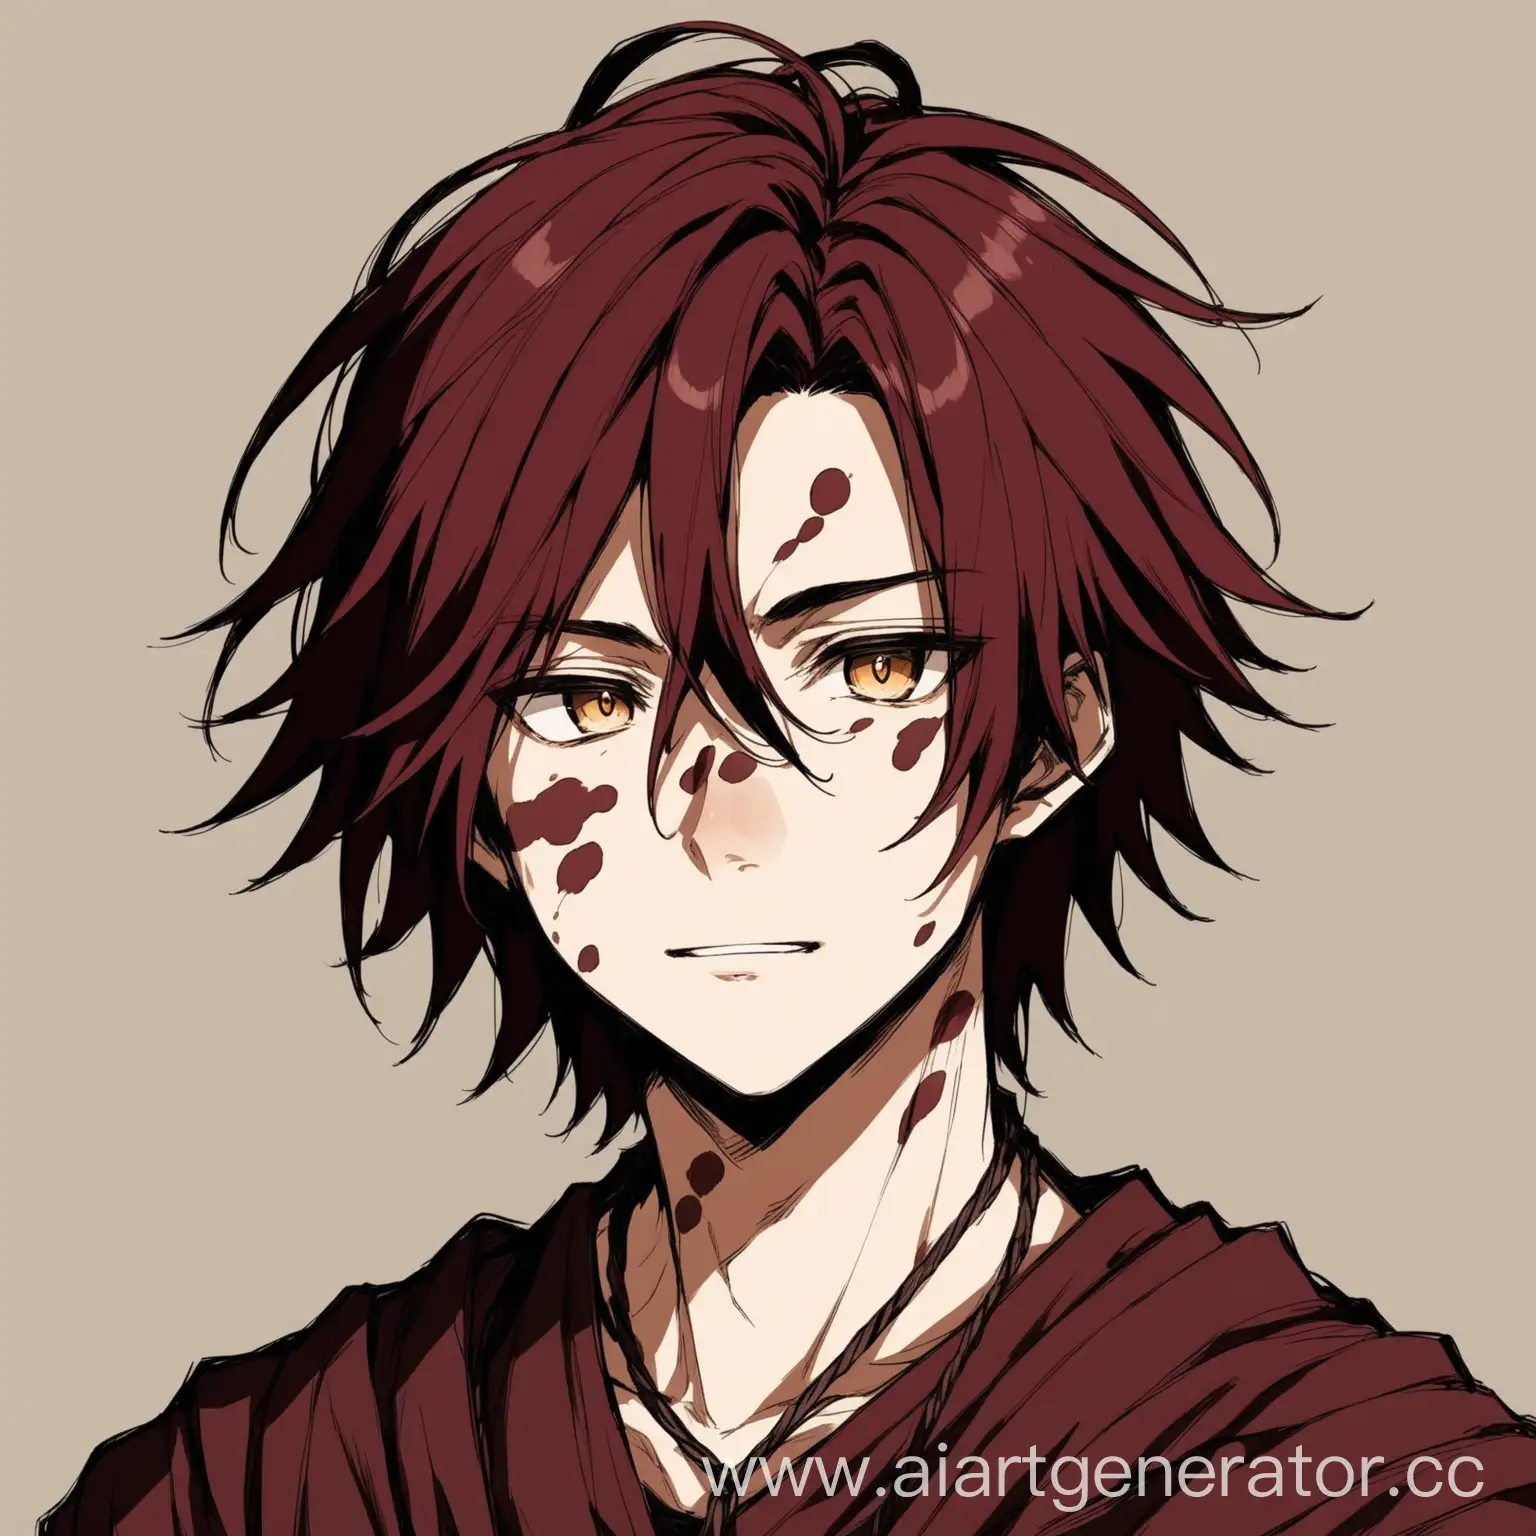 Anime-Style-Character-BurgundyHaired-Man-with-a-Unique-Birthmark